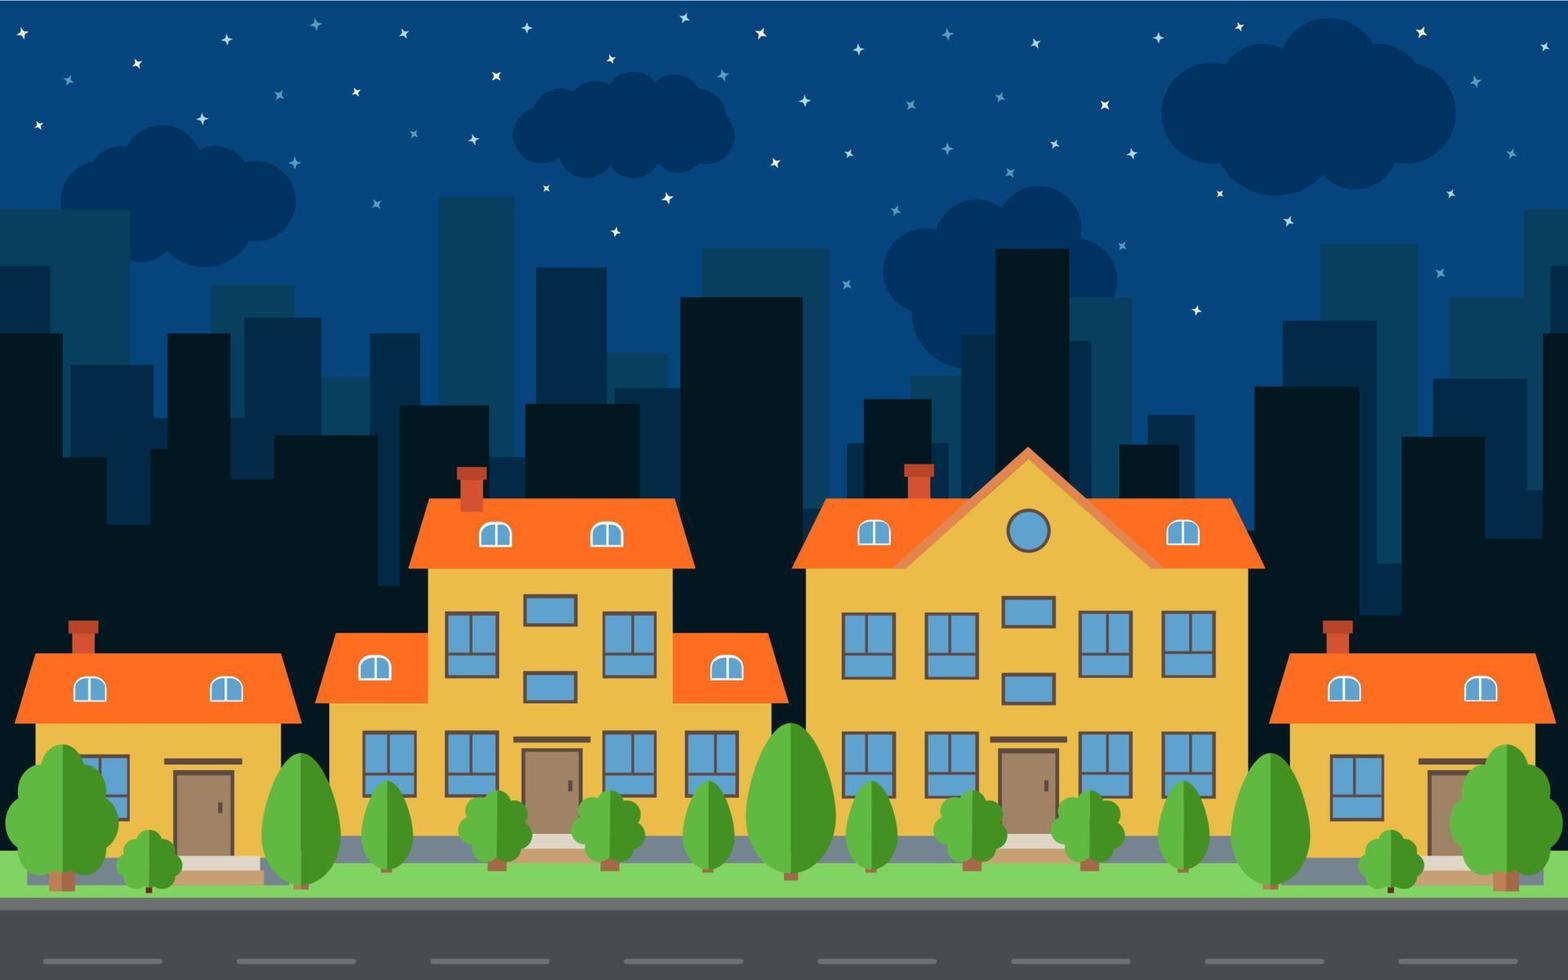 Vector night city with cartoon houses and buildings with green trees and shrubs. City space with road on flat style background concept. Summer urban landscape